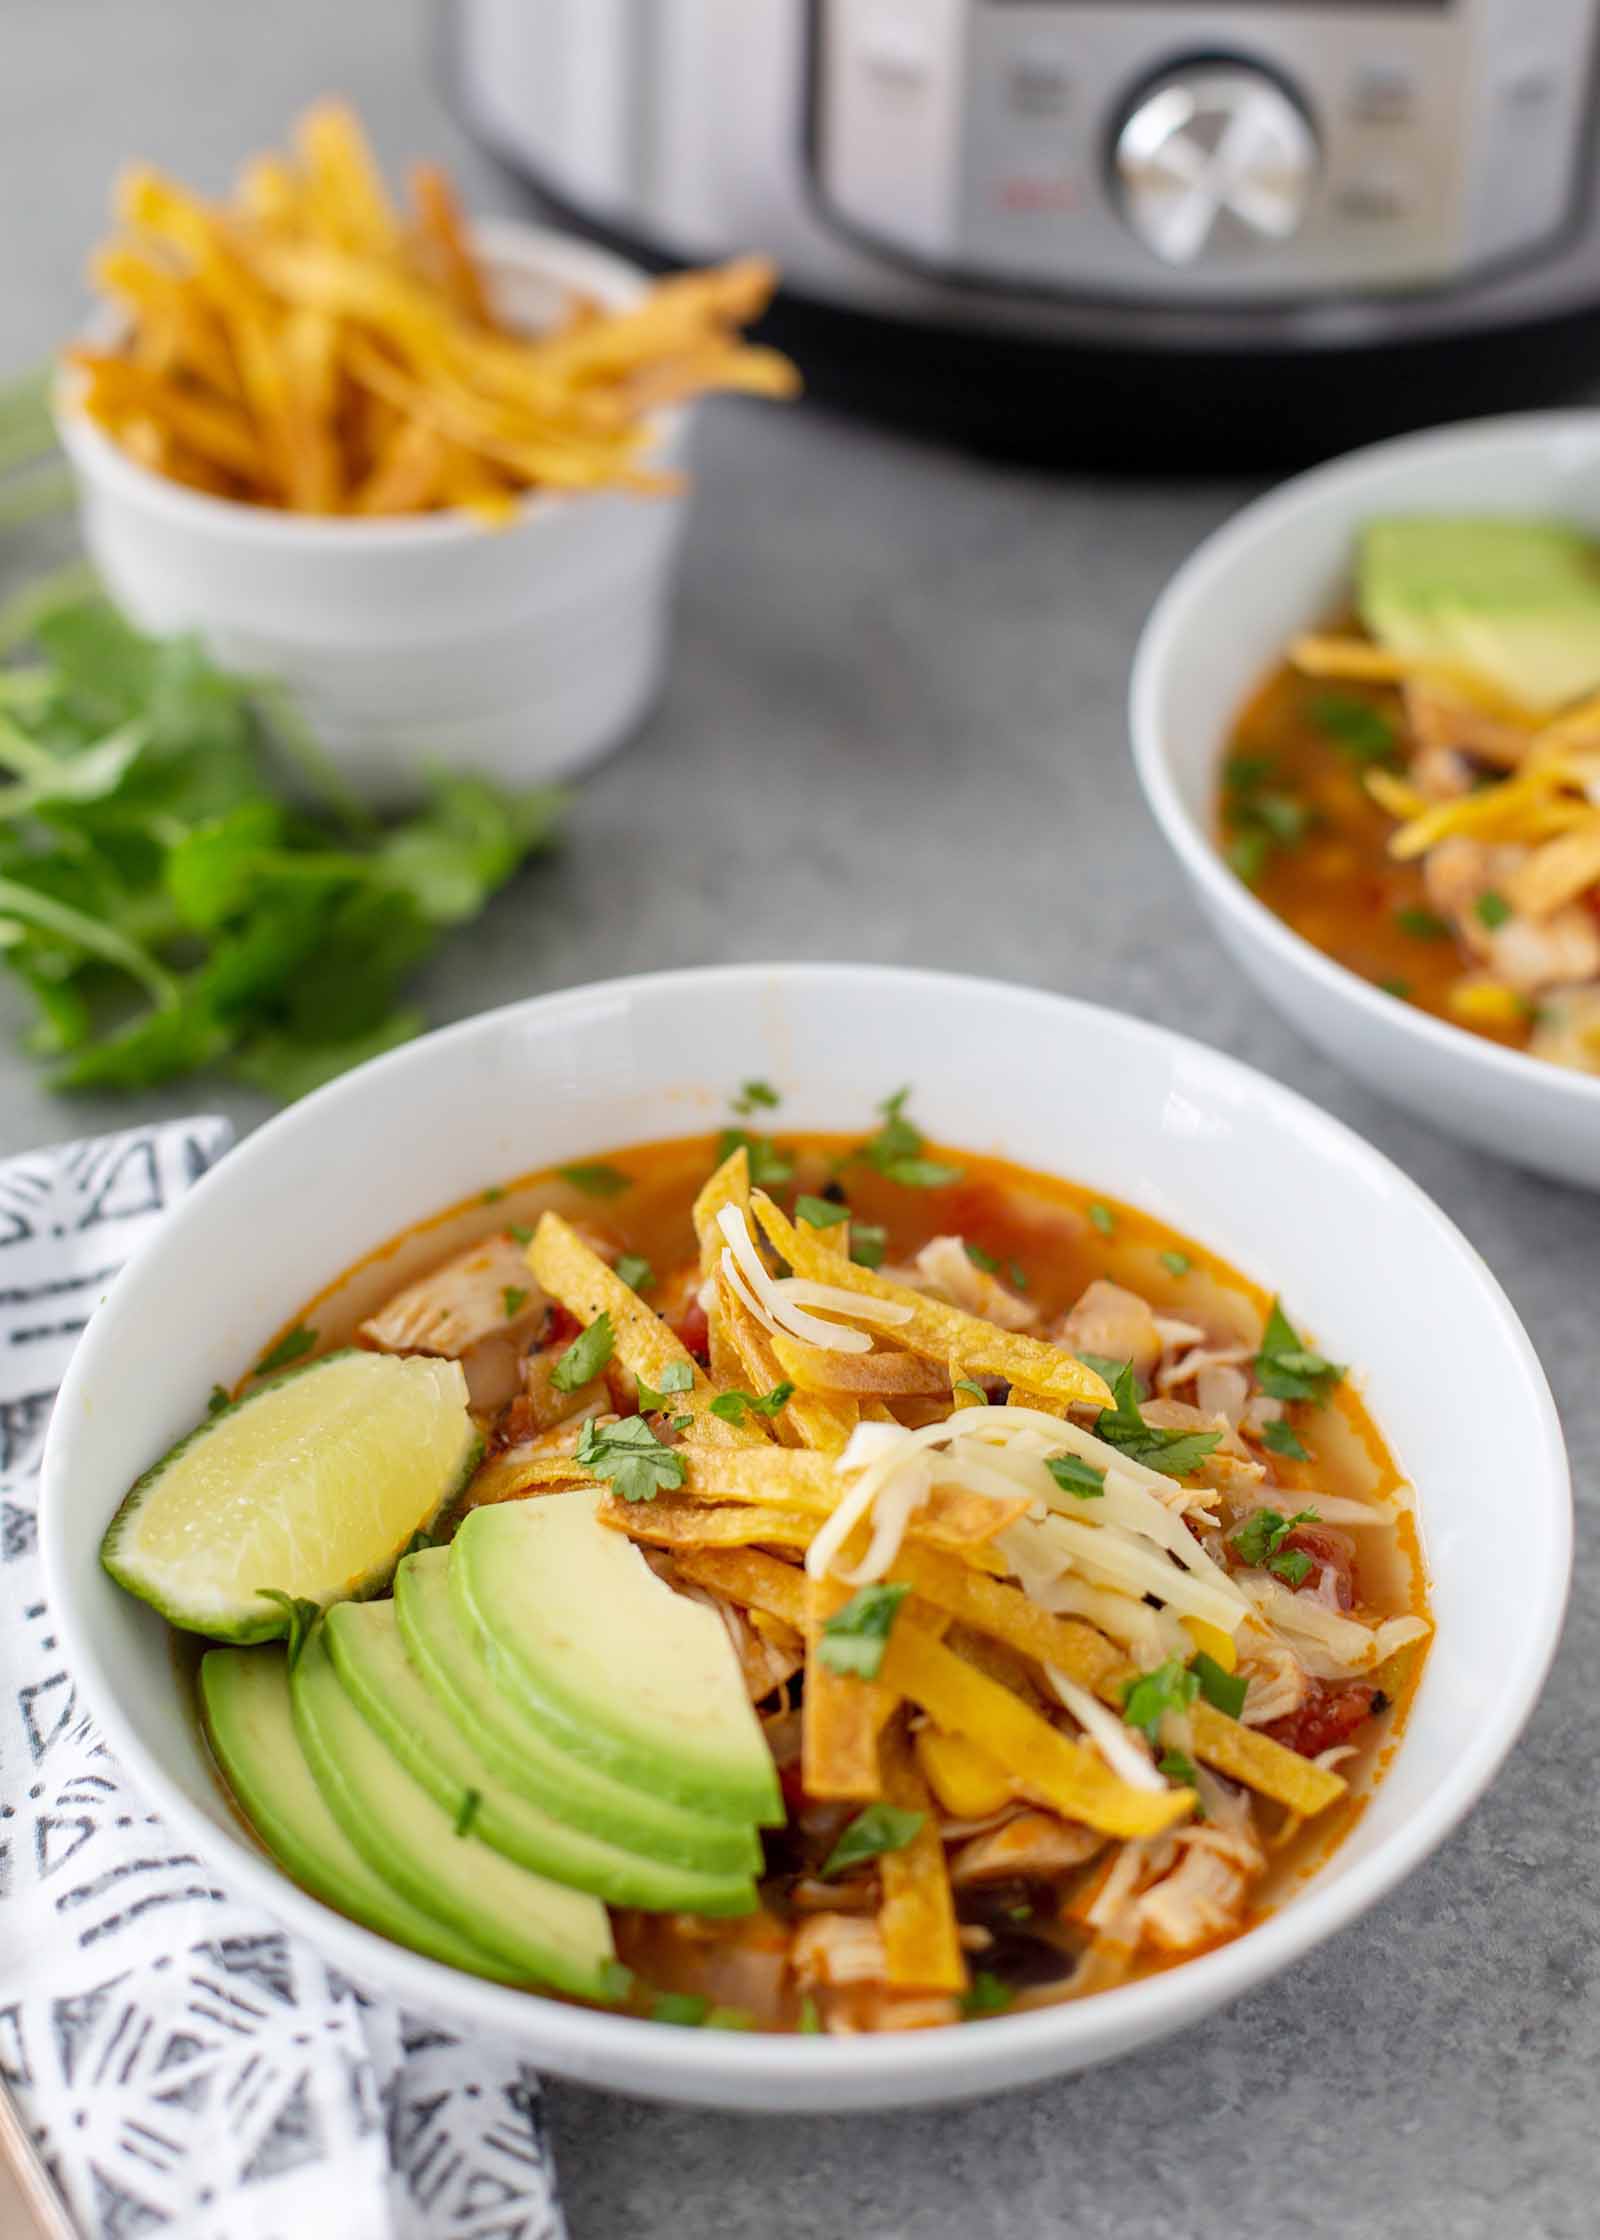 A white bowl of the best instant pot chicken tortilla soup. Each bowl has a red broth with shredded chicken, slices of fried tortilla, cheese, lime wedge and avocado slices. A couple stems of cilantro are in the bottom right corner. A ramekin has strips of fried tortillas inside and the bottom of an instant pot is visible at the top of the photo. A grey patterned linen napkin is next to the bowl. A second bowl of soup is partially visible to the right of the first bowl.